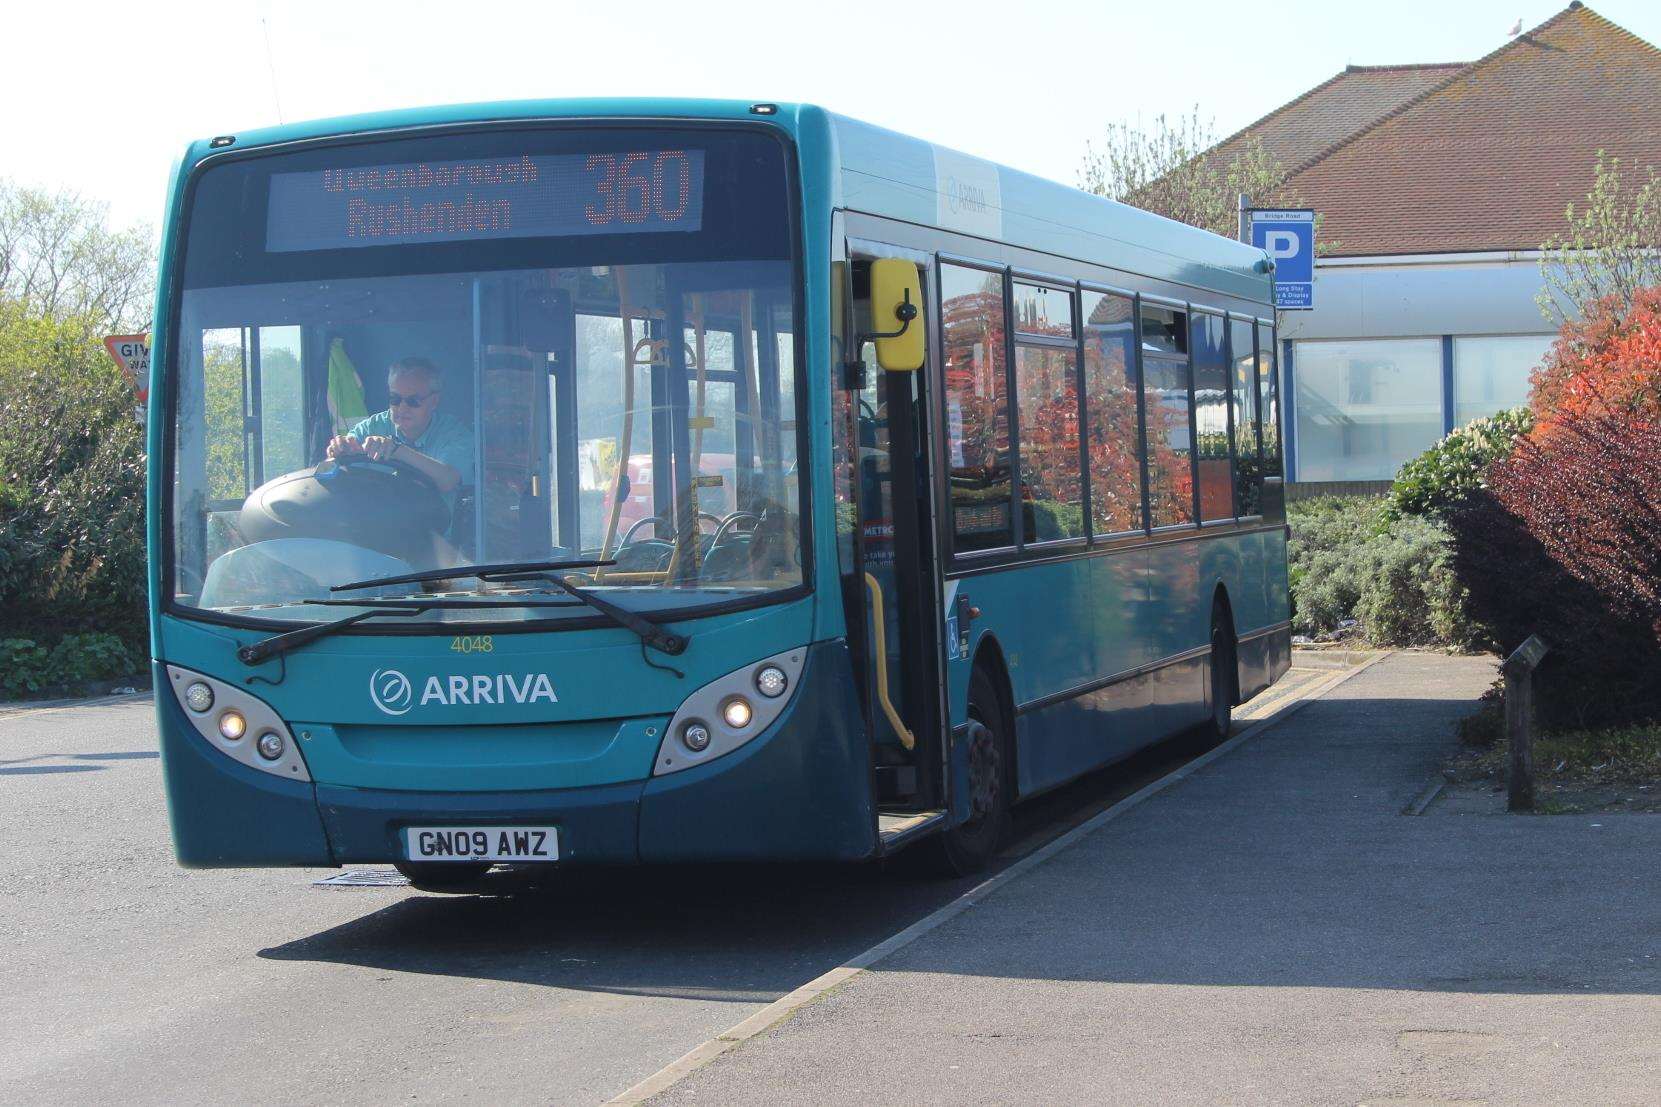 An Arriva bus on Sheppey